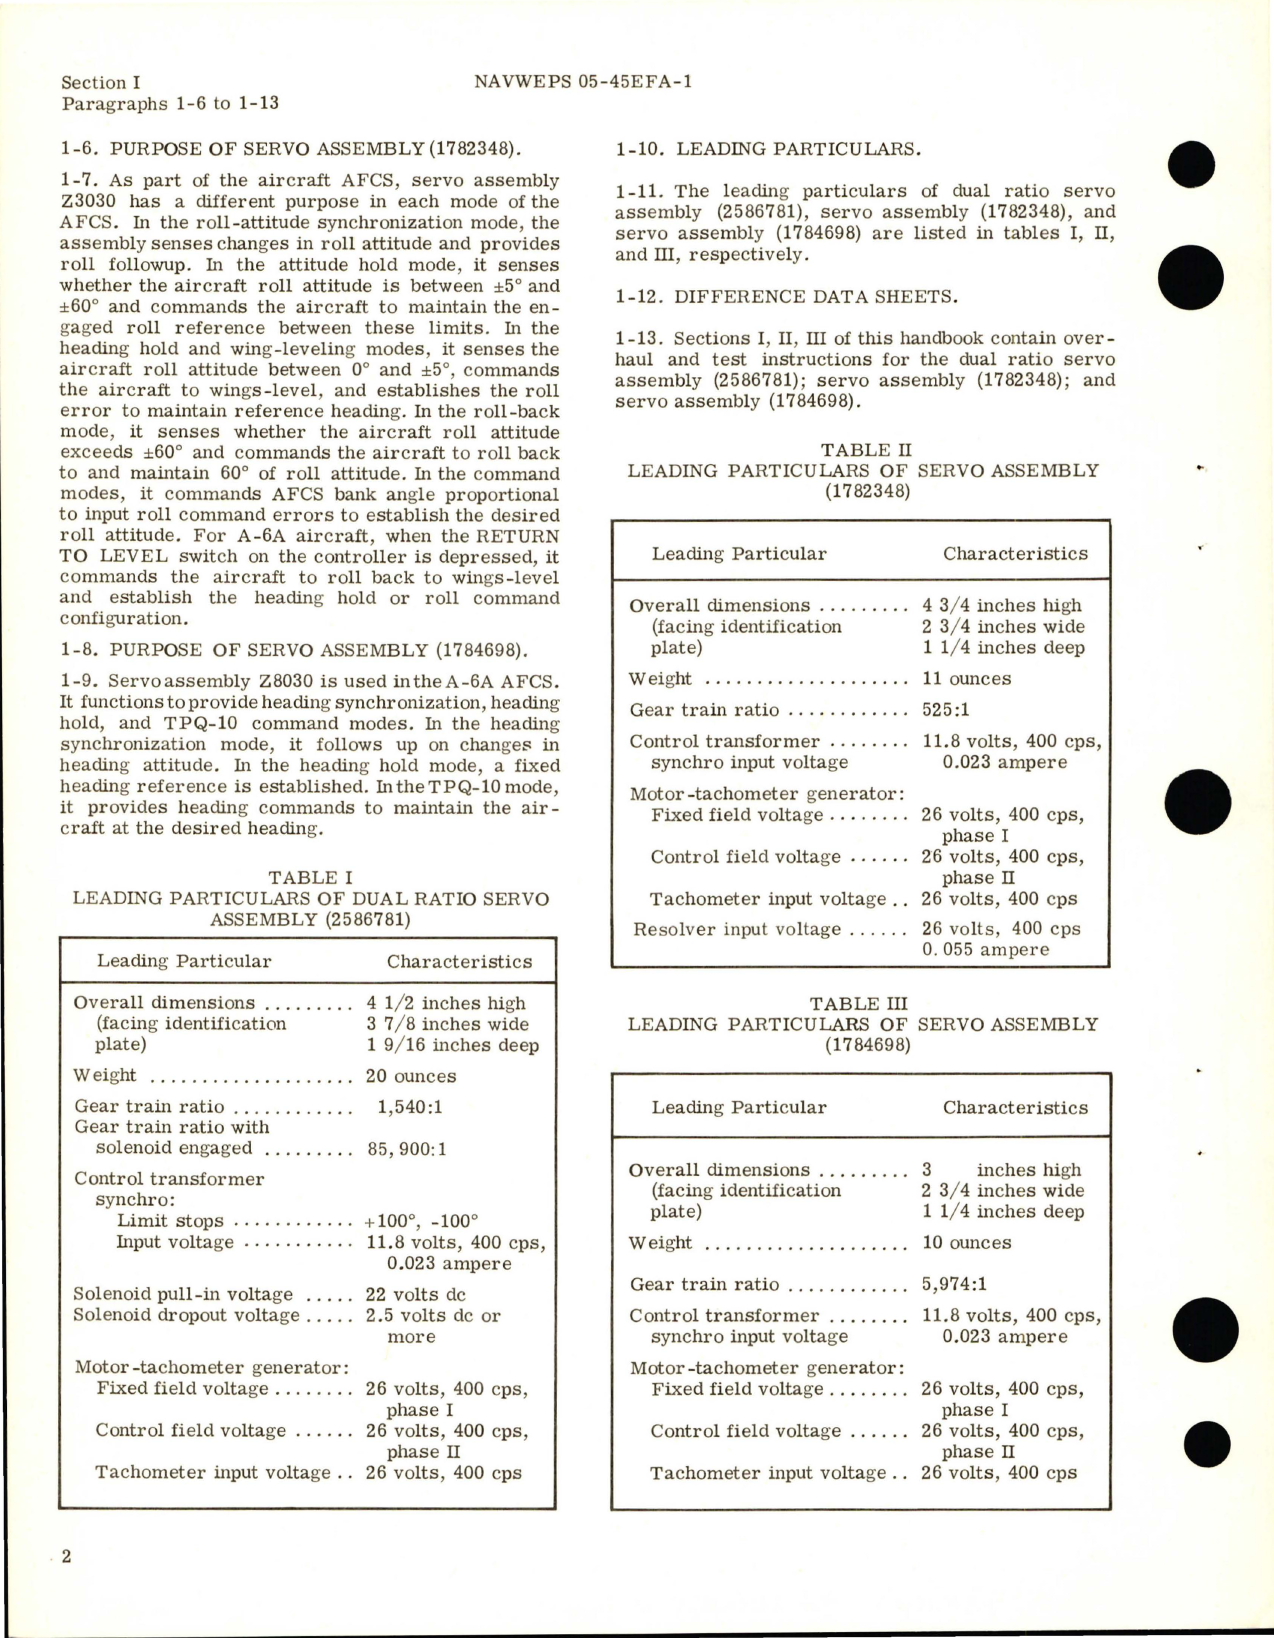 Sample page 8 from AirCorps Library document: Overhaul Instructions for Dual Ratio Servo Assembly Z4020, Servo Assembly Z3030 and Servo Assembly Z8030